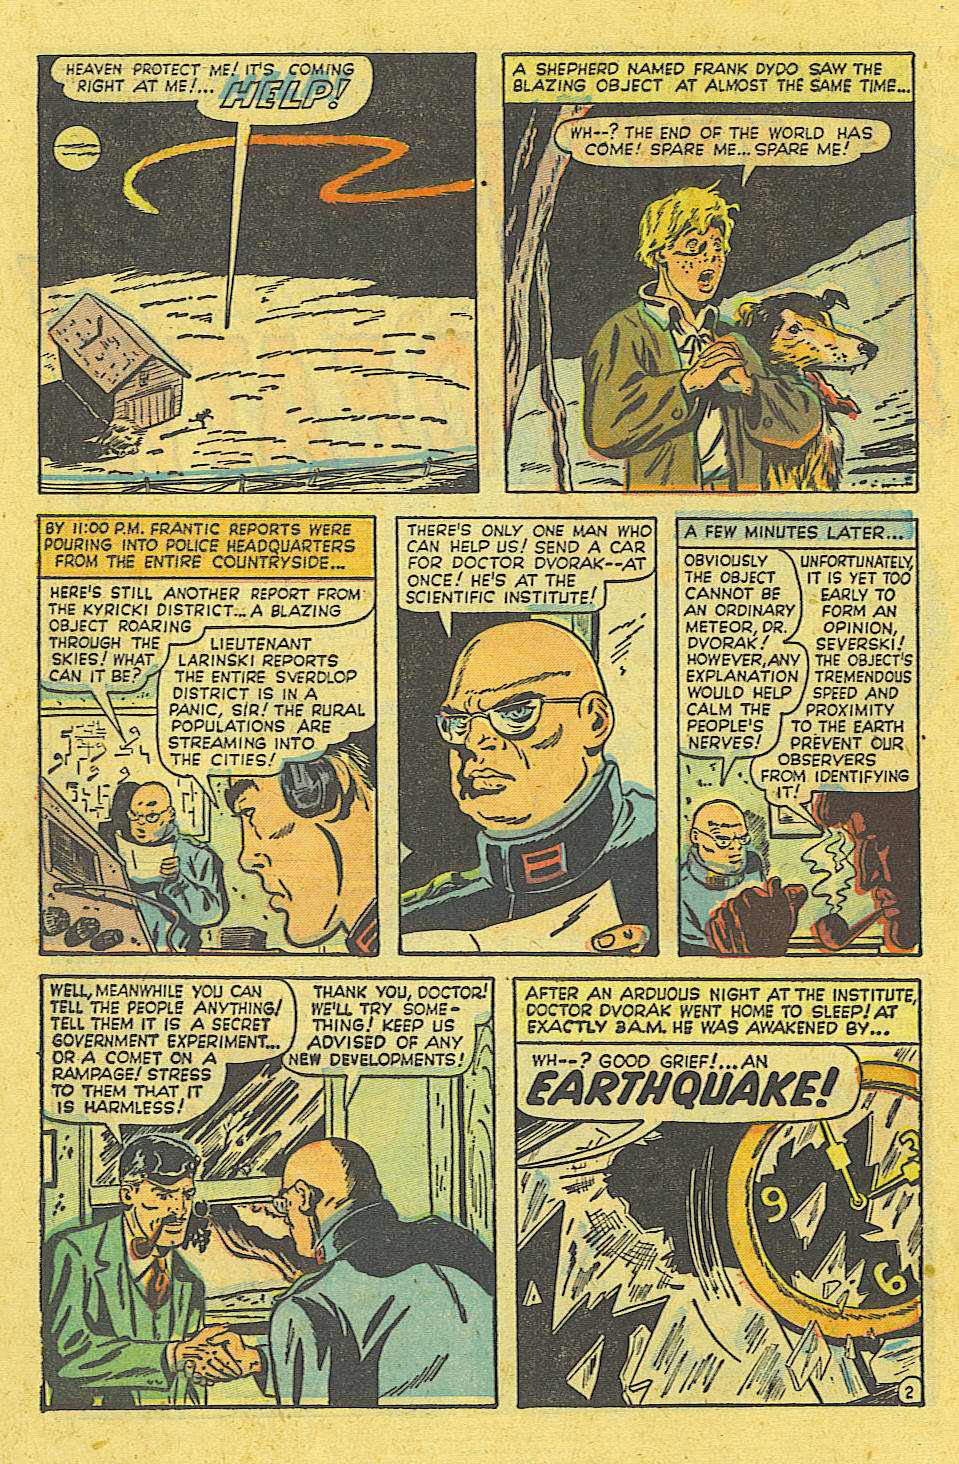 Marvel Tales (1949) 95 Page 2